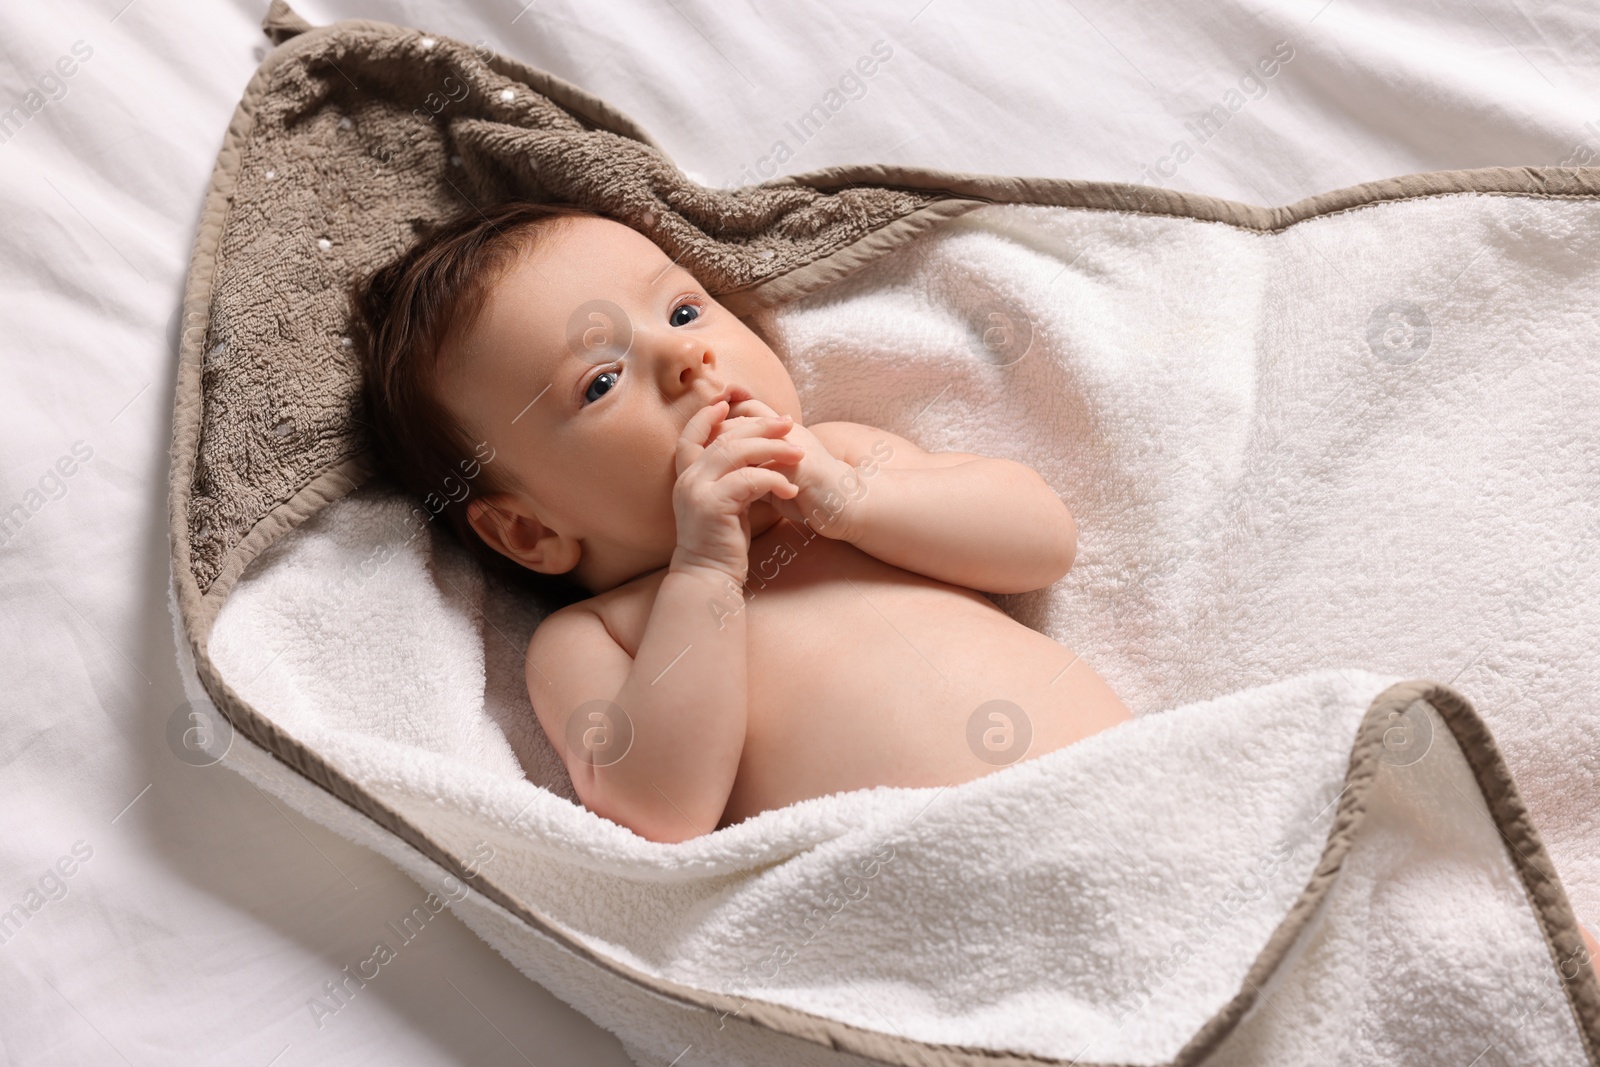 Photo of Cute little baby in hooded towel after bathing on bed, top view